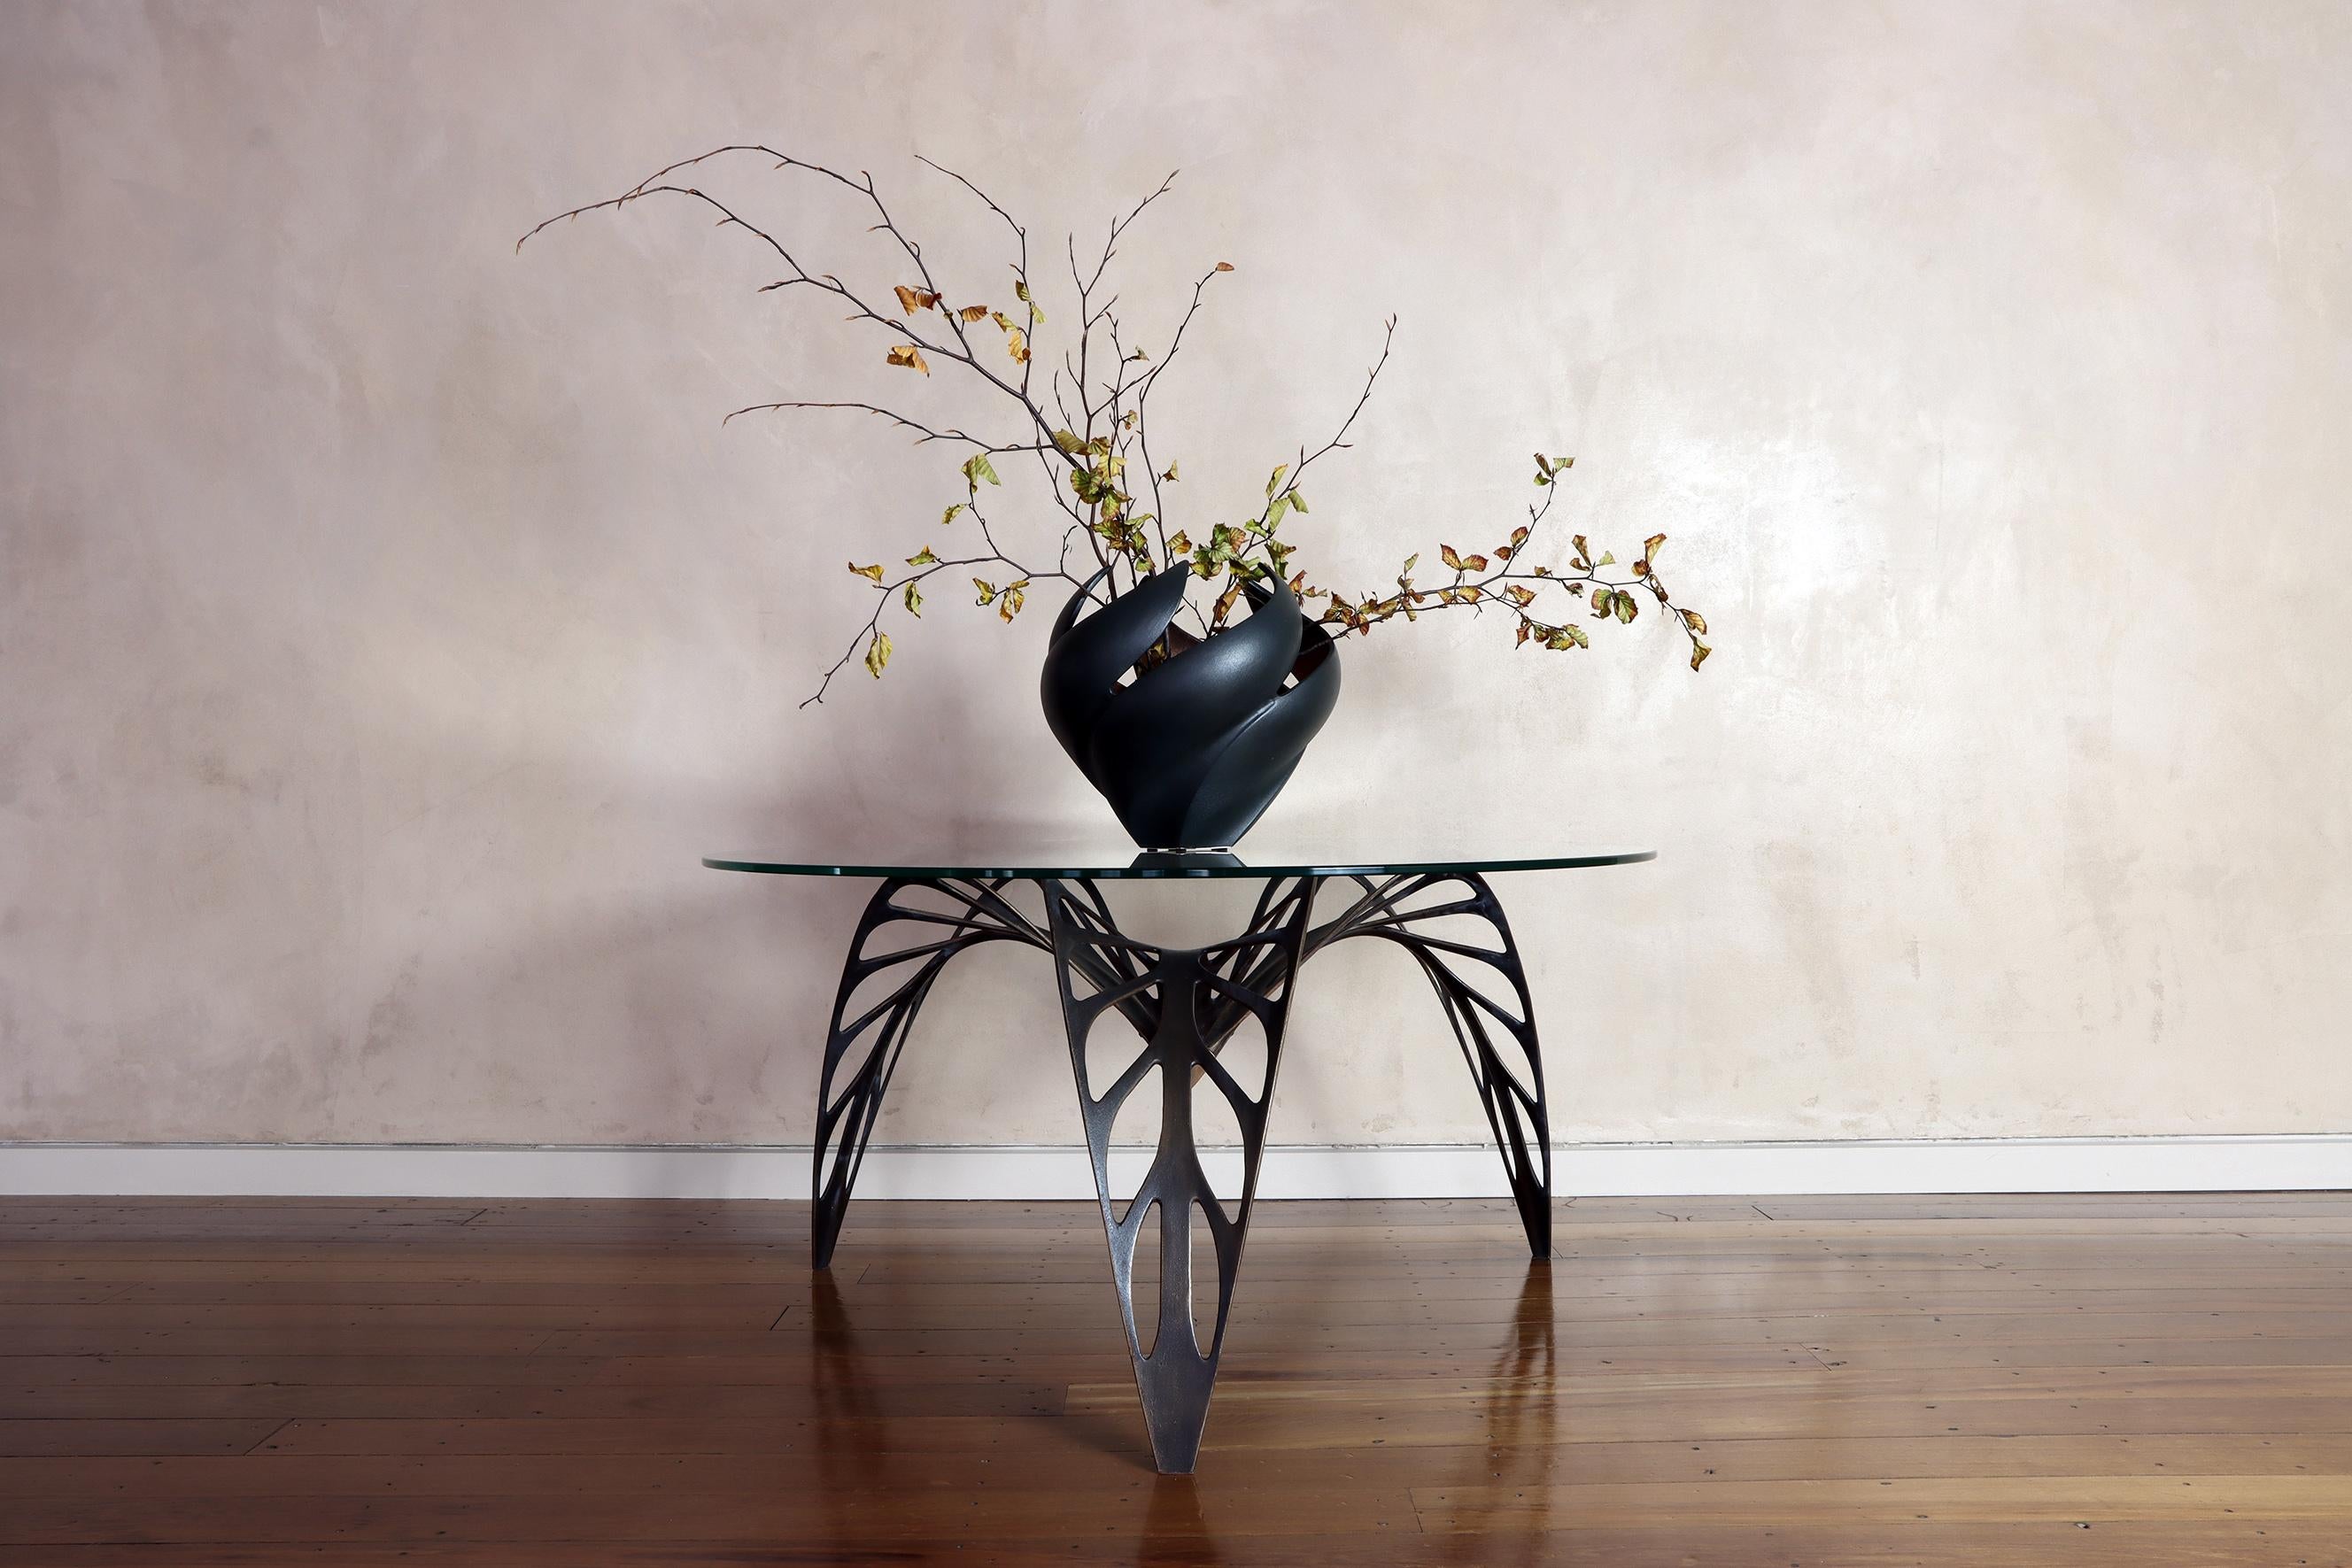 Designed with the intention to bring the outdoors in, the Del Table is reminiscent of our natural surroundings, in this case, abstract versions of leaves of the Monstera Deliciosa.

The Del Table illustrates a creative take on borrowing elements